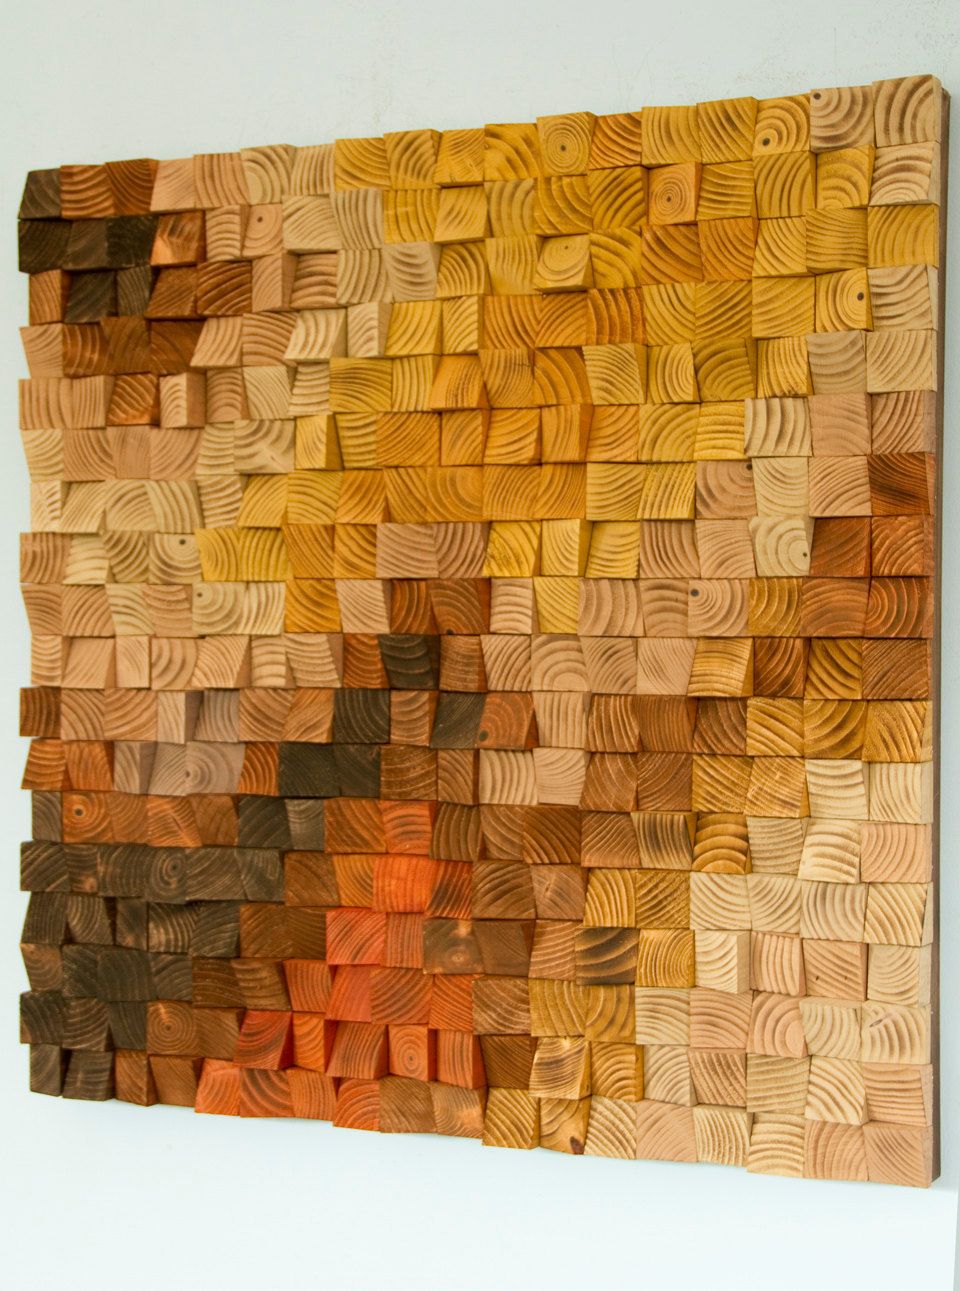 Large Rustic Wood Wall Art, Wood Wall Sculpture, Abstract Intended For Abstract Wood Wall Art (View 12 of 15)